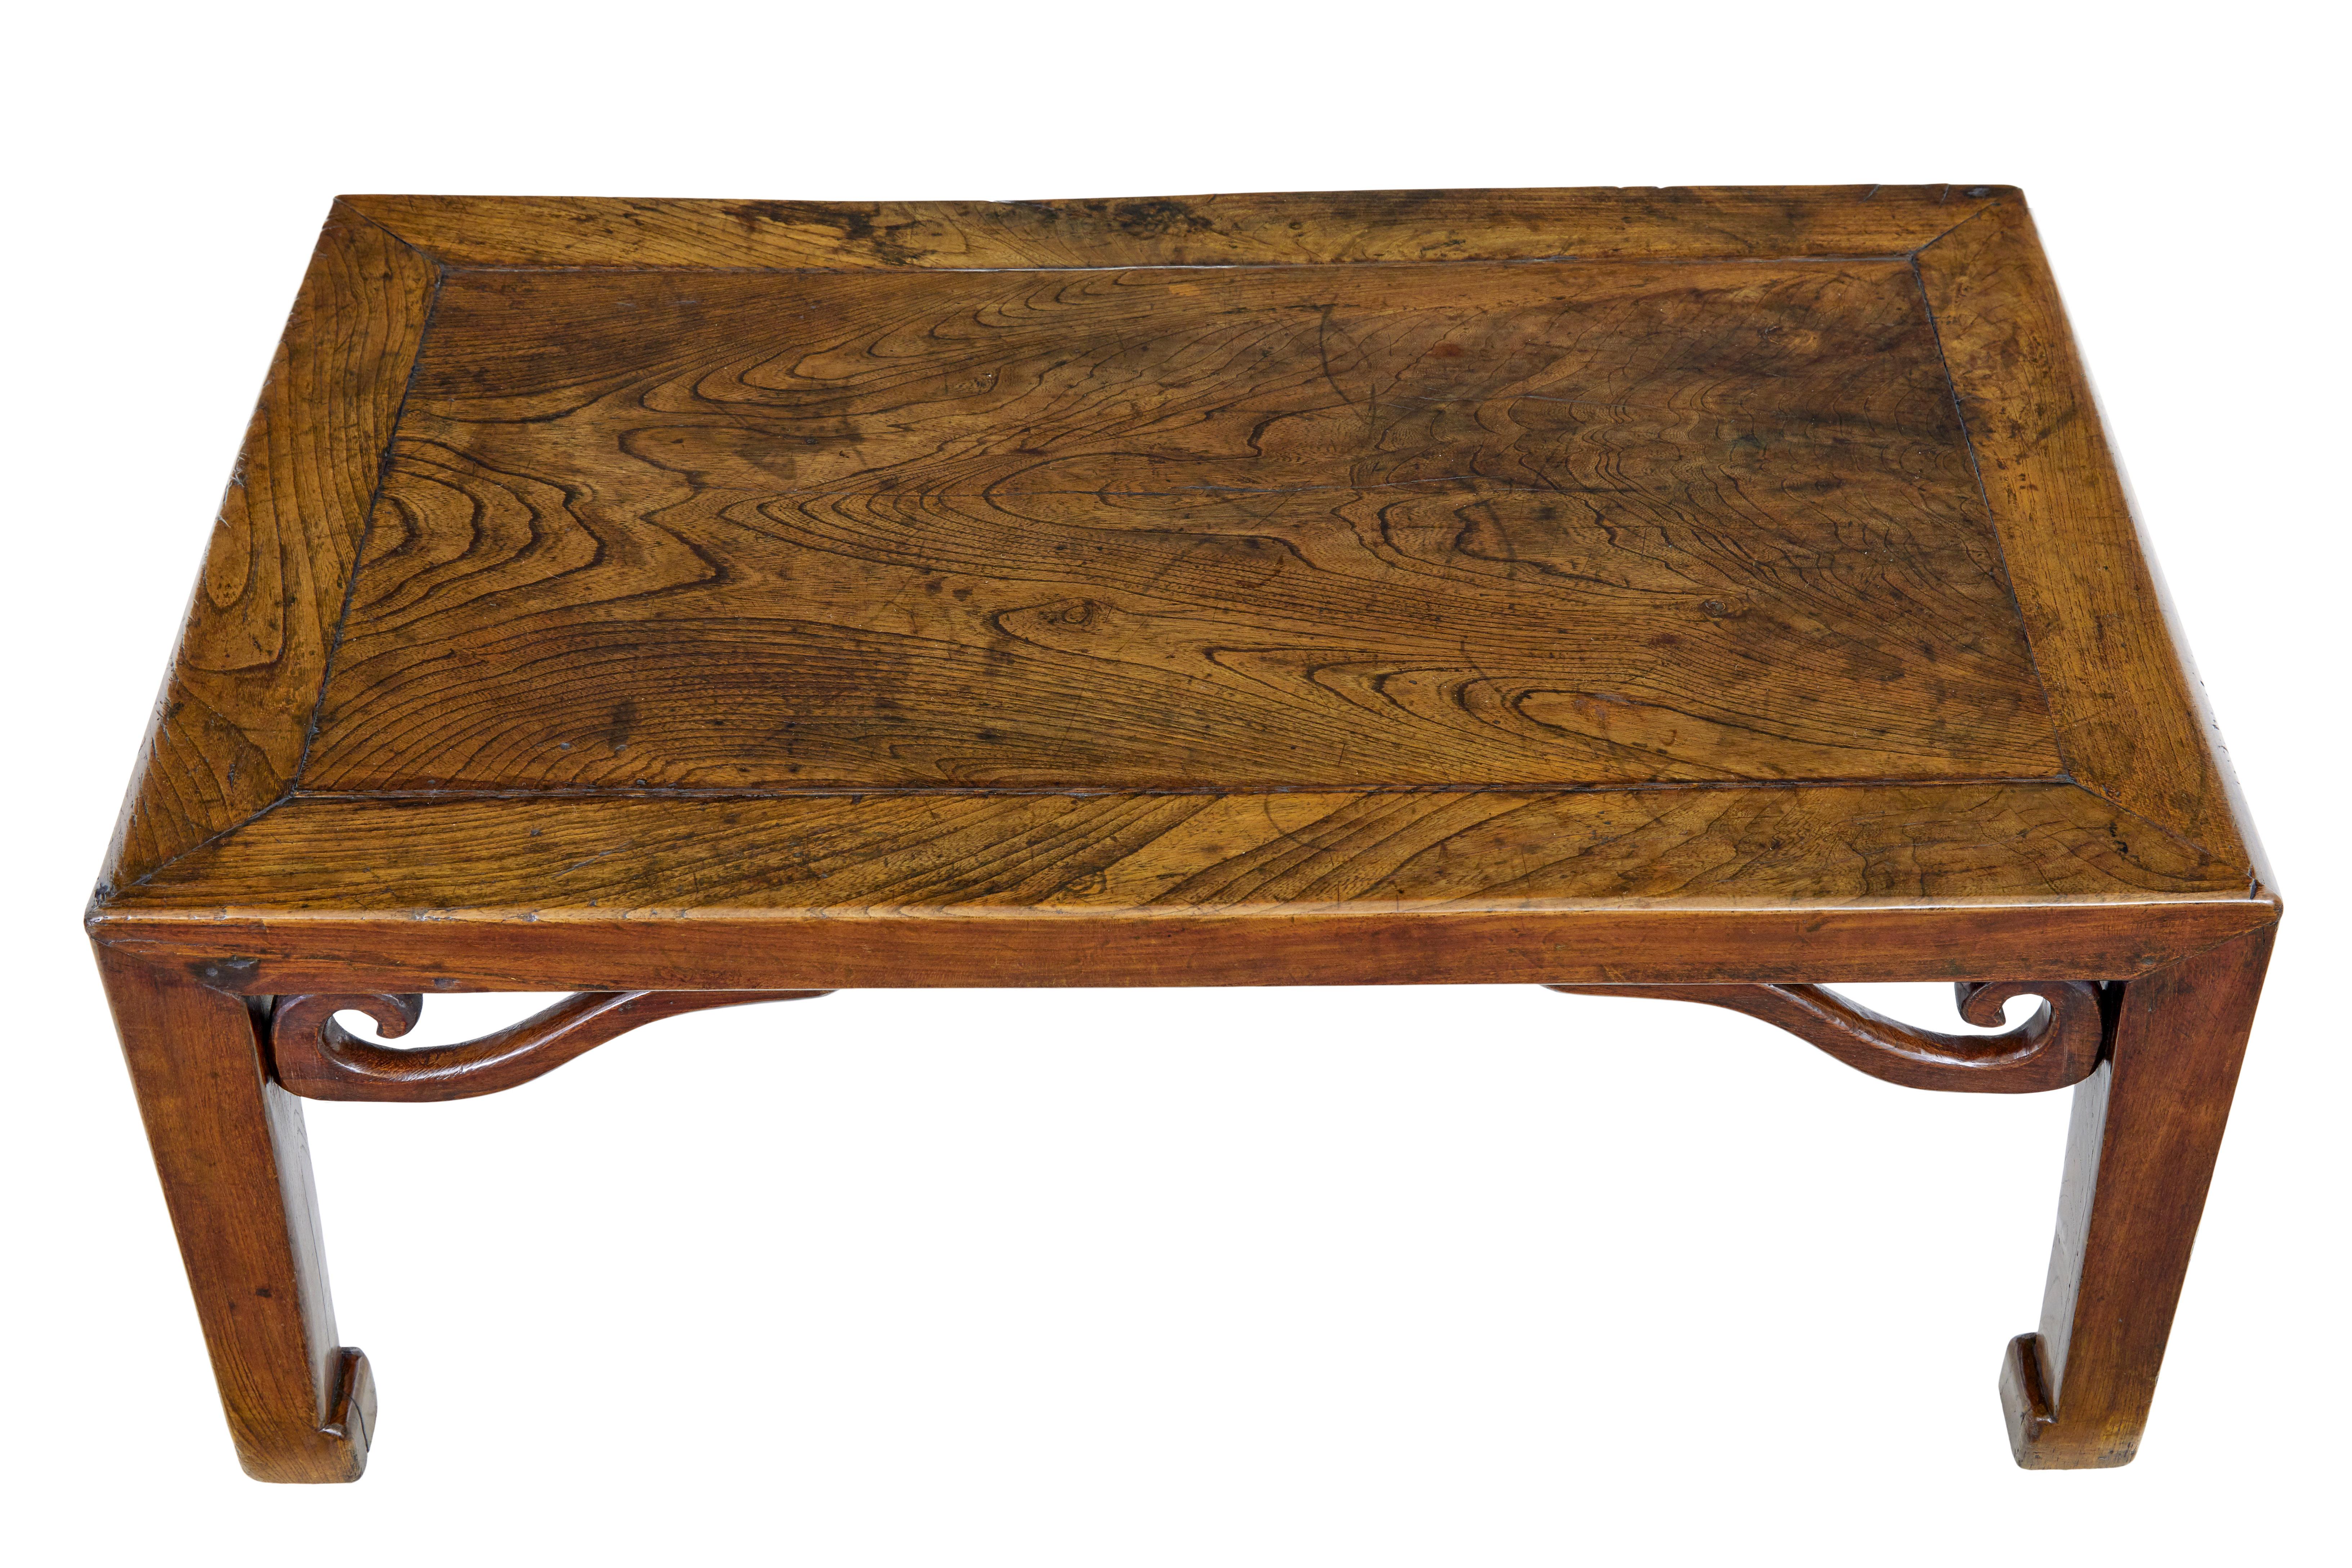 19th century carved Chinese elm low table circa 1850.

Good quality table which is made from stunning timber, showcasing it's grain and patination.  Rectangular top with a central single piece with surrounding border.  Raised on 4 legs with carved